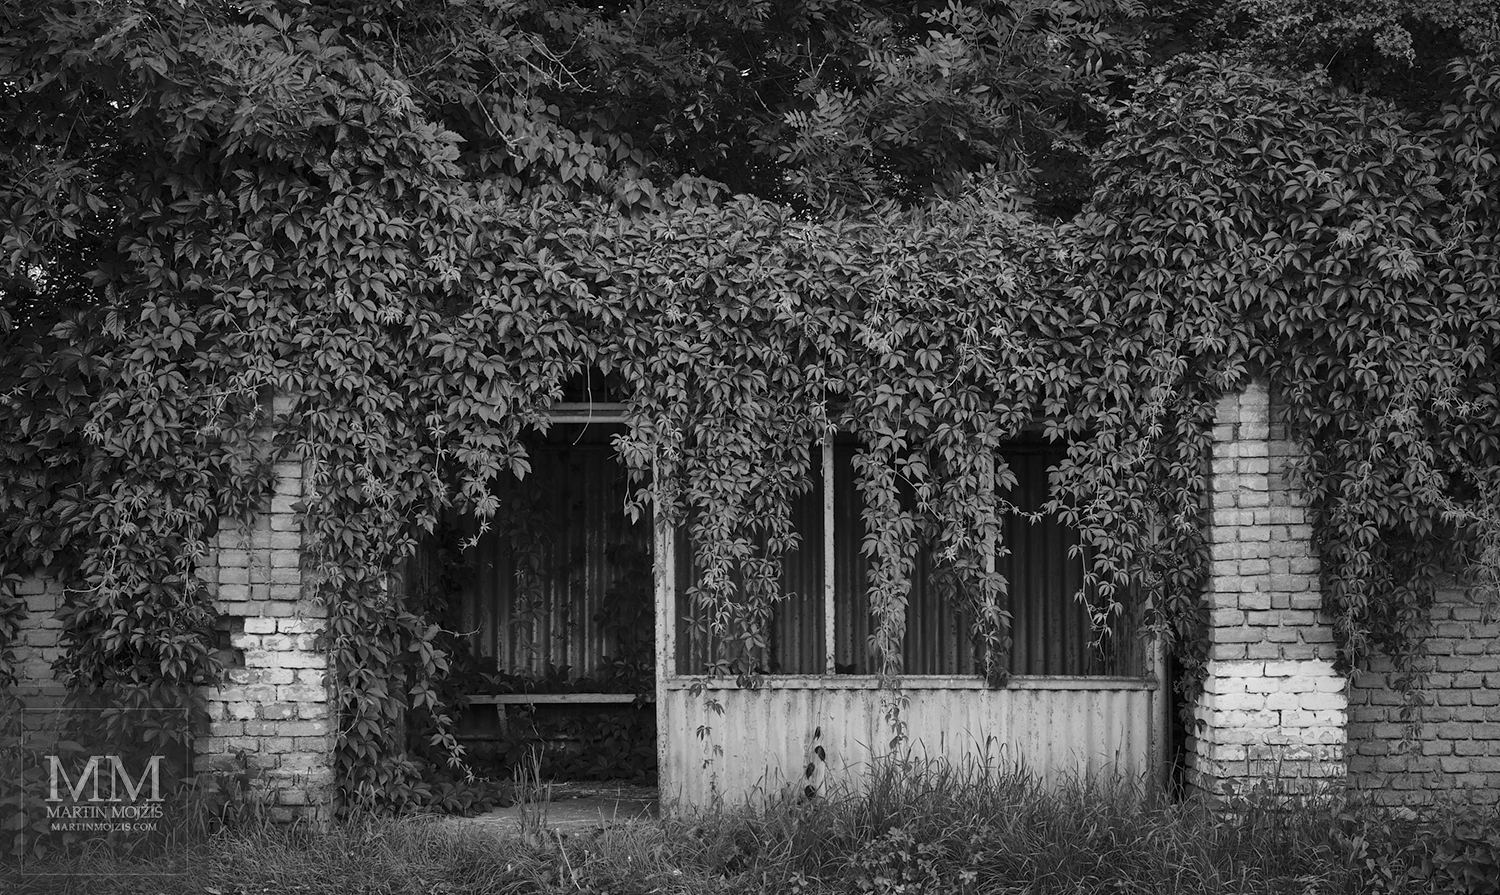 A bus stop overgrown with climbing plants. Black and white fine art photograph IN THE KINGDOM OF PLANTS, photographed by Martin Mojzis.